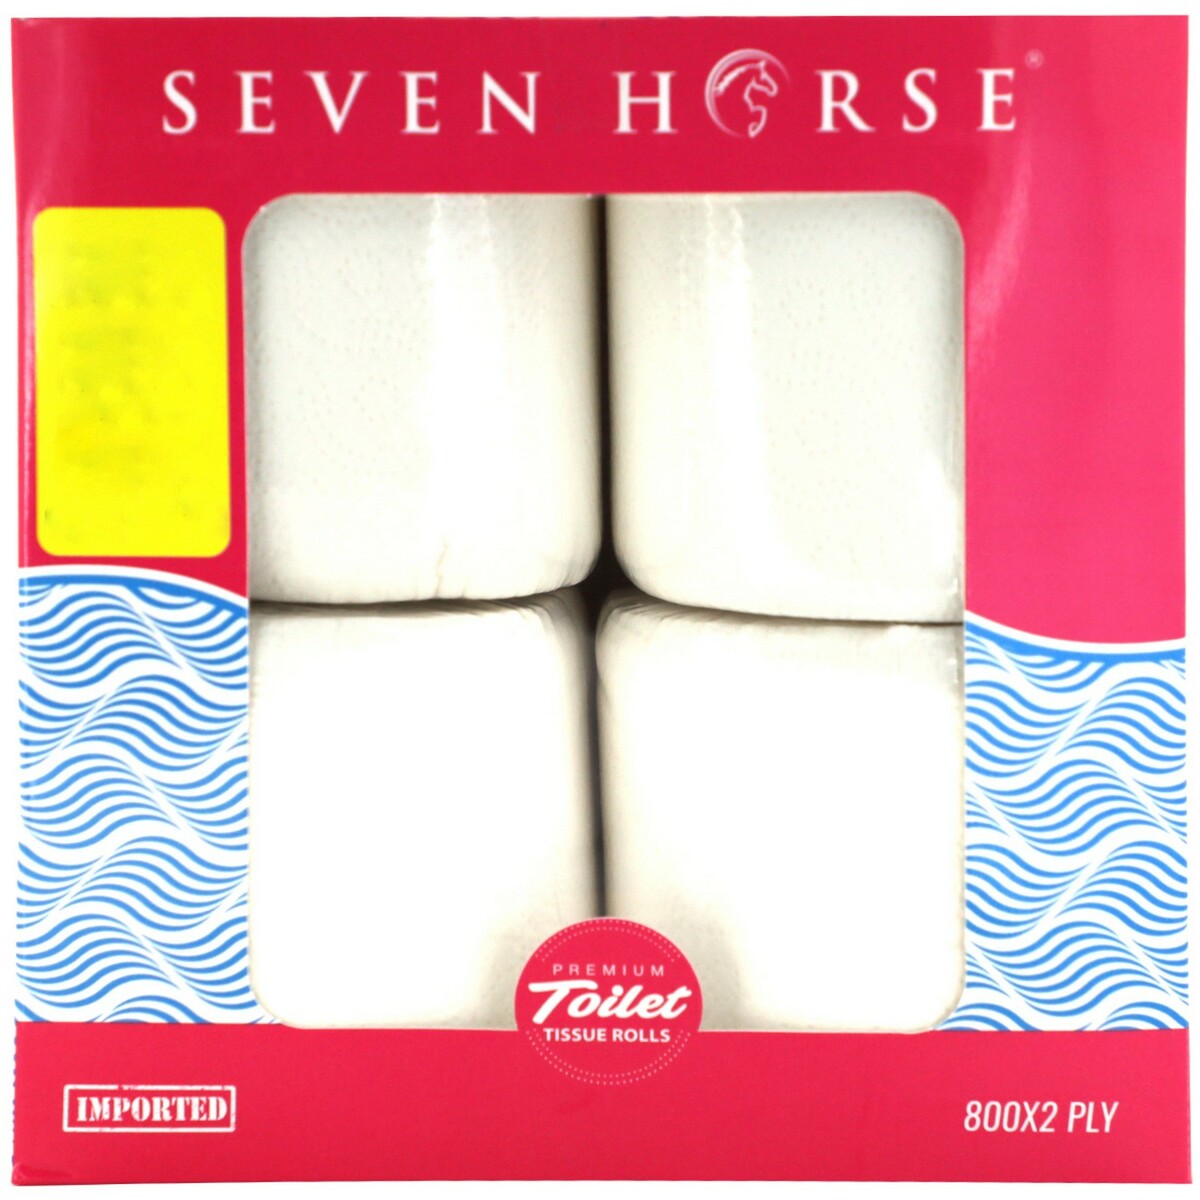 Seven Horse Toilet Roll 2 PLY 200'sx4 Roll 3+1 Offer